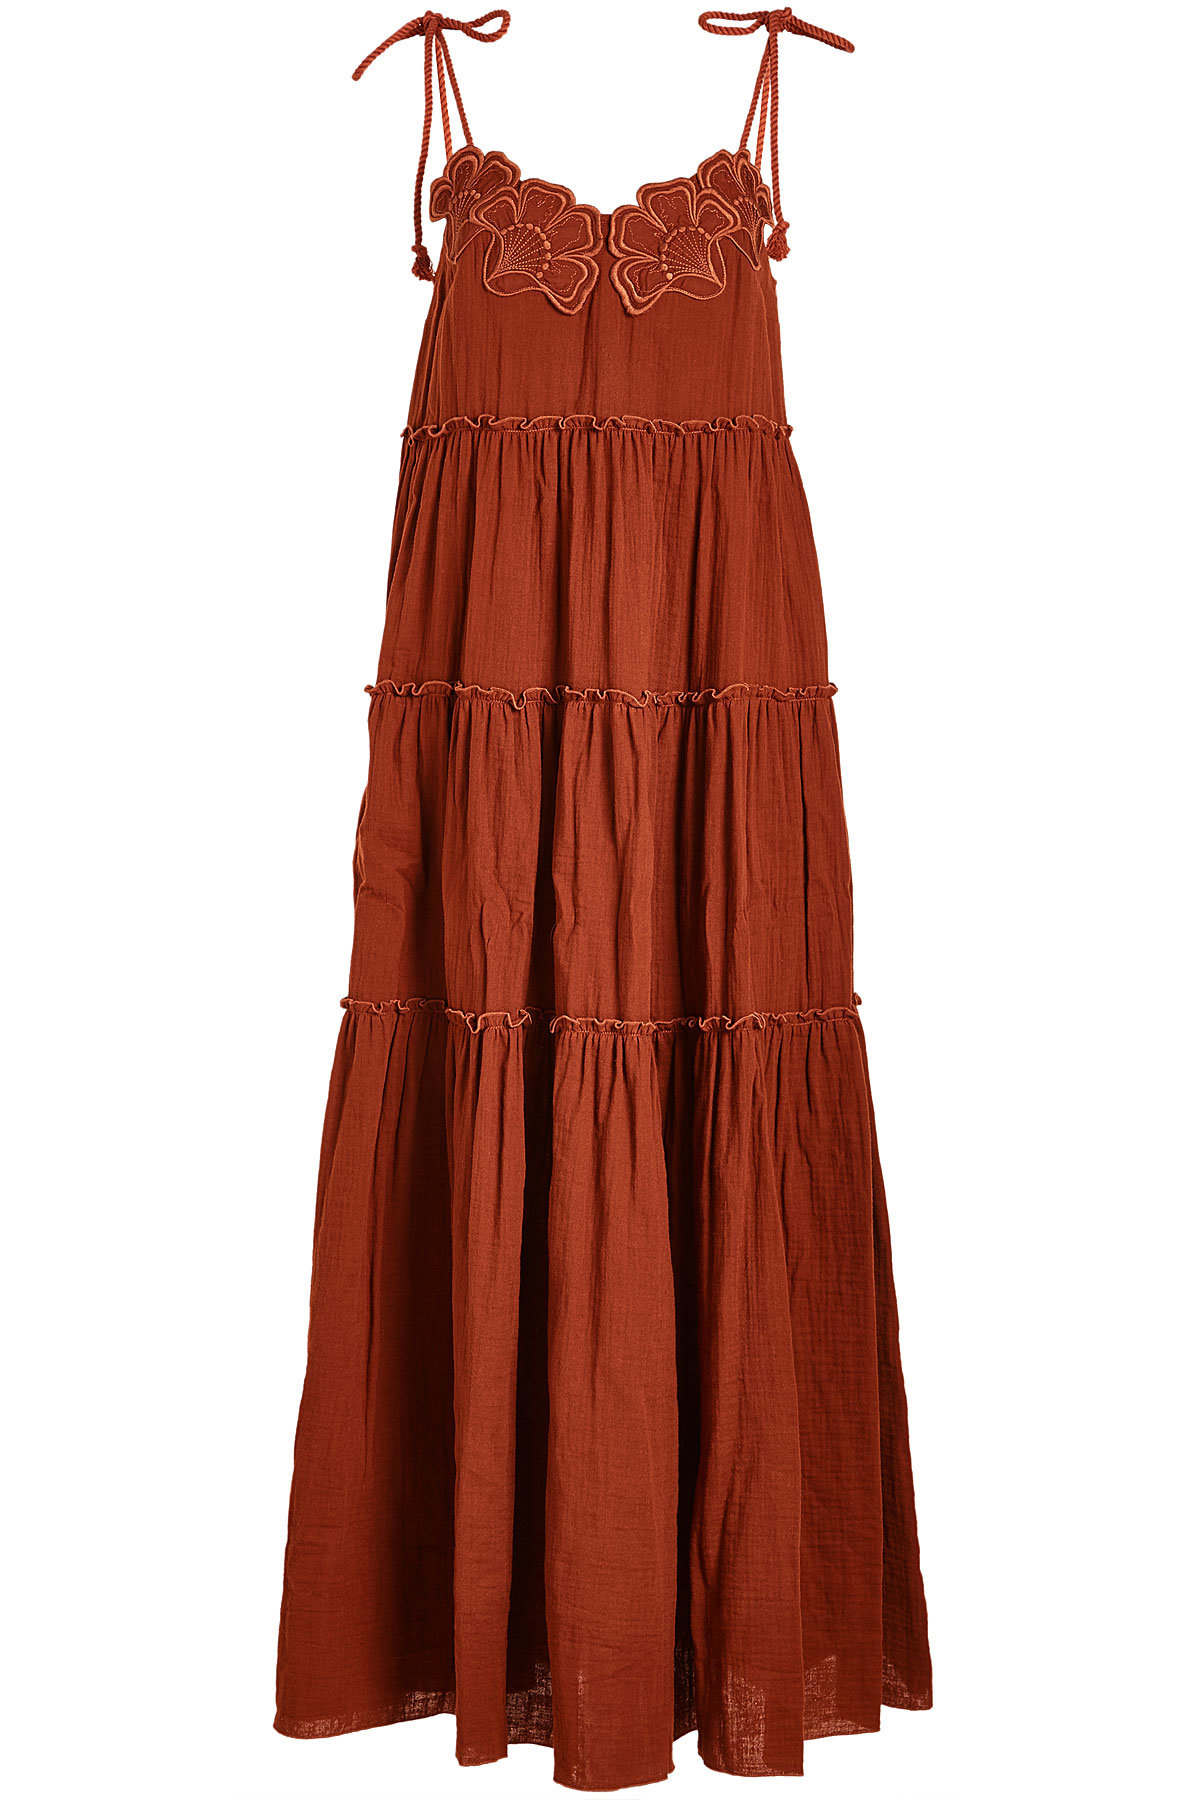 See by Chloe - Embroidered Cheesecloth Cotton Dress